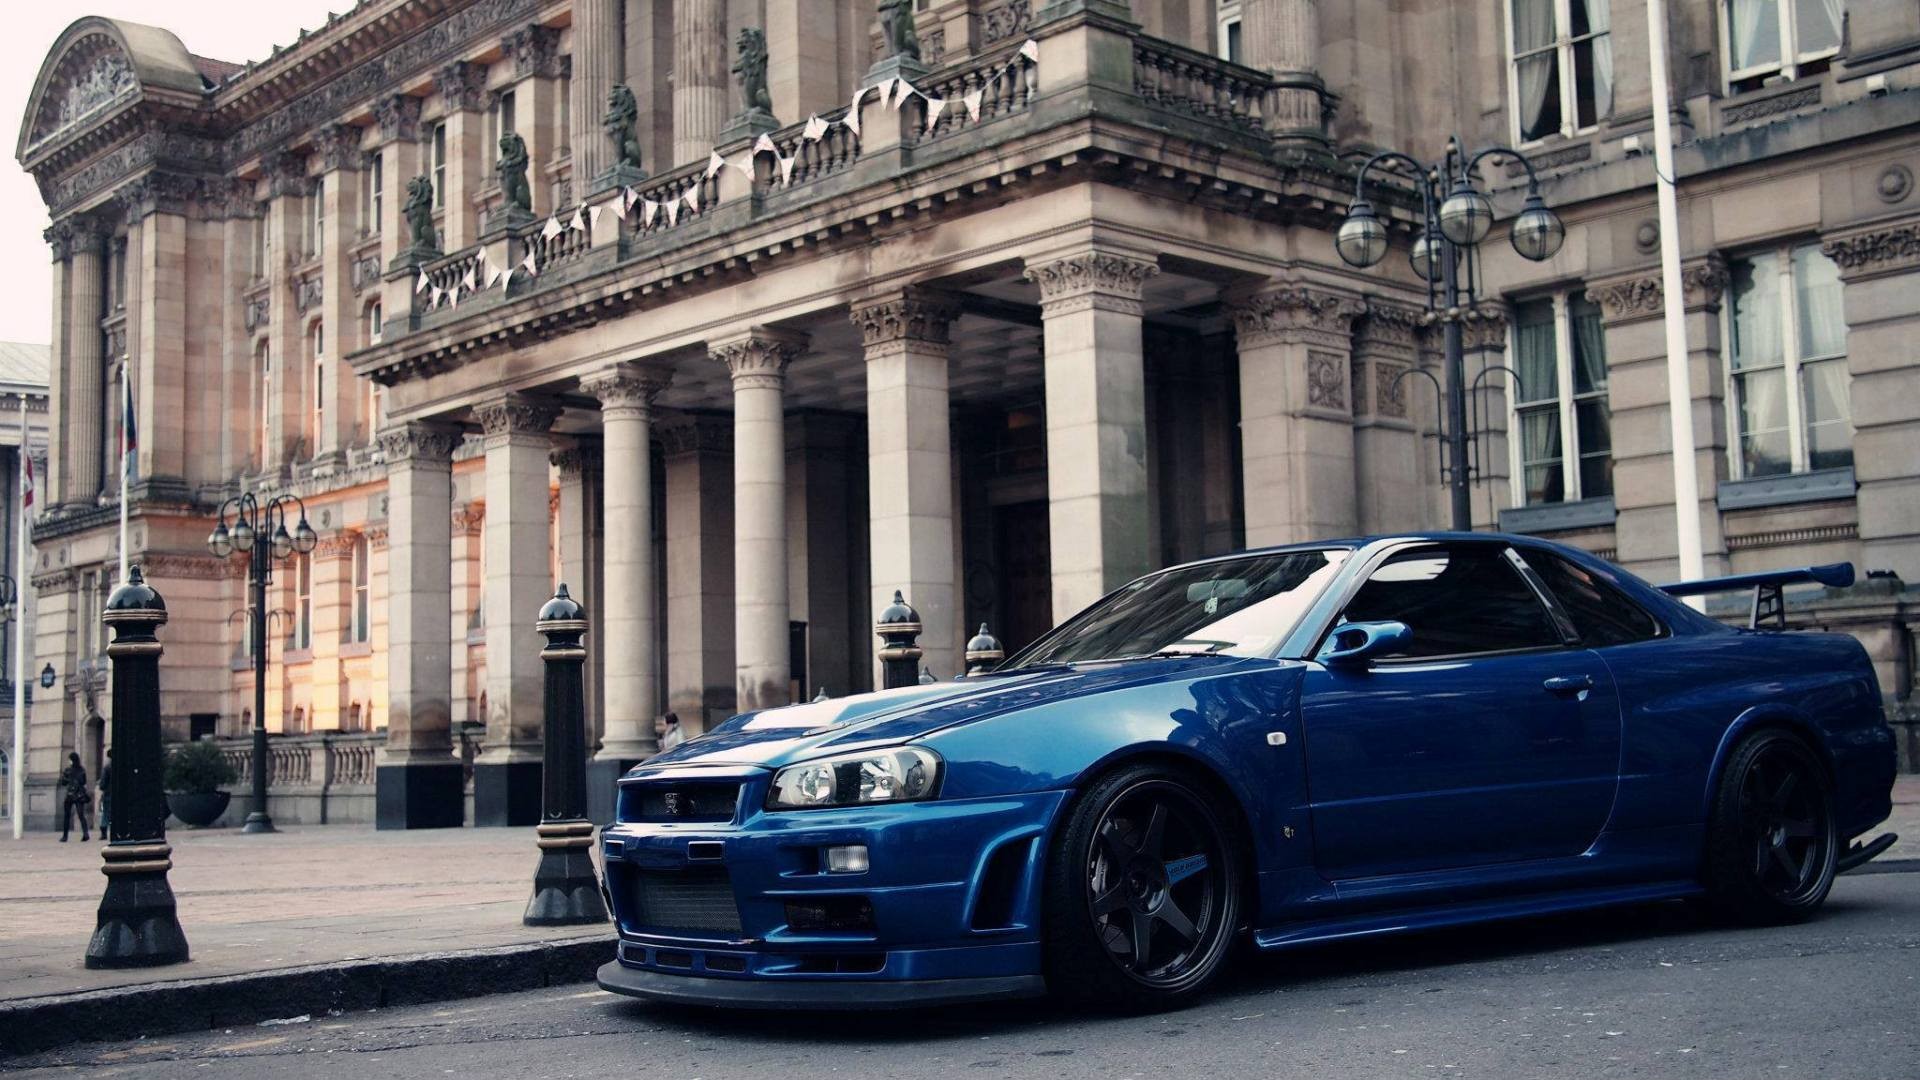  Nissan Skyline HQ Background Wallpapers